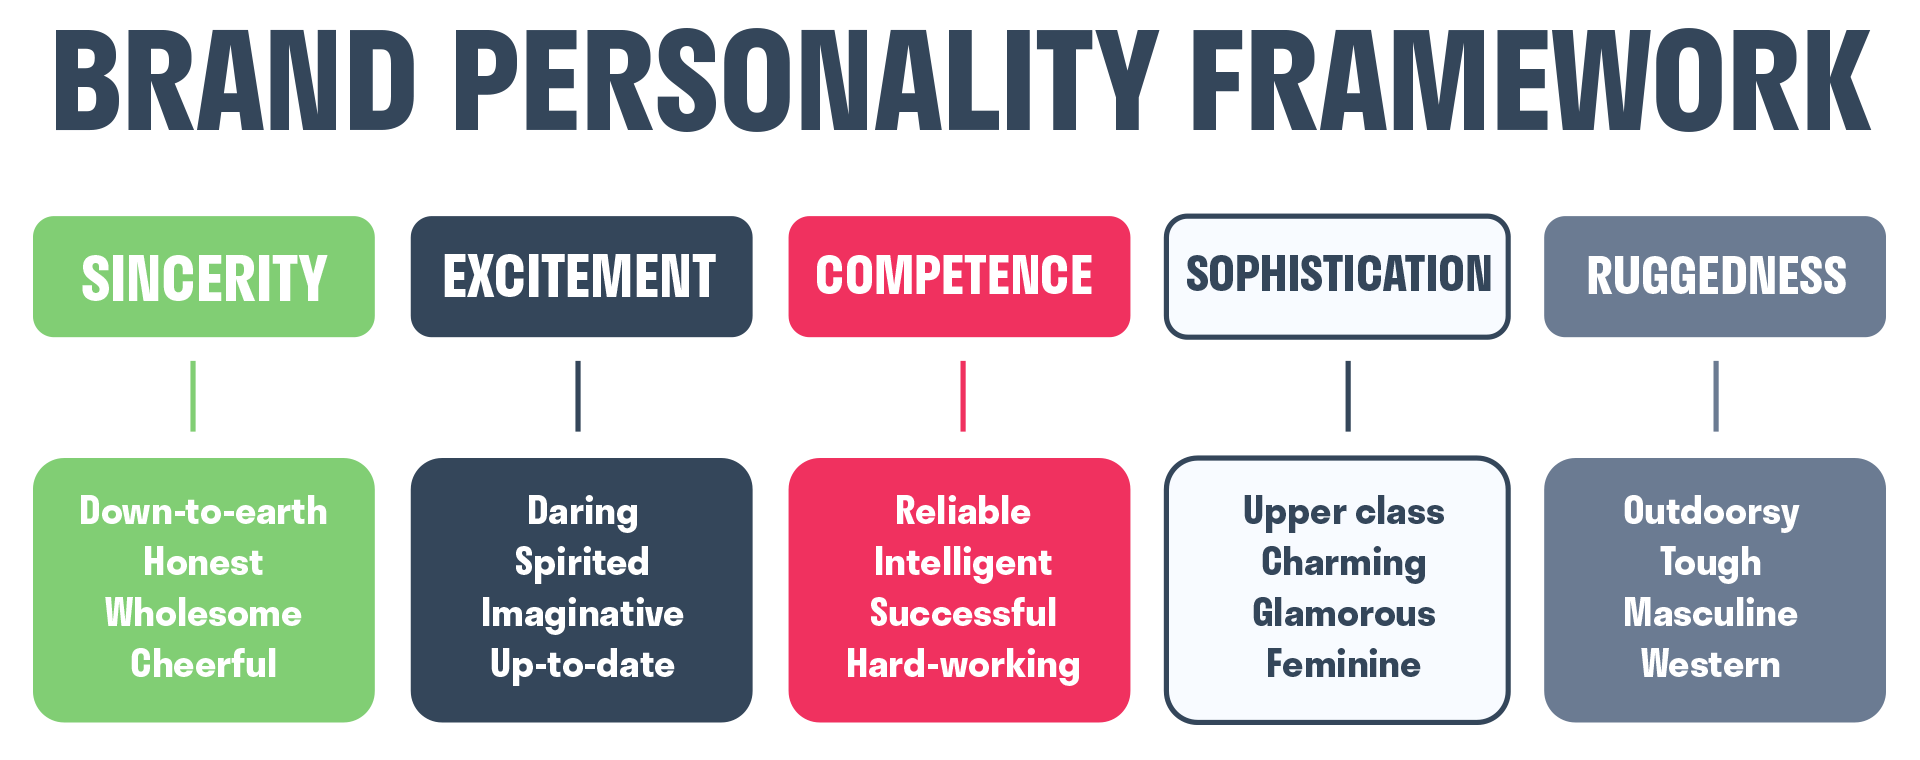 brand personality framework by jennifer aaker includes: Sincerity, excitement, competence, sophistication and ruggedness